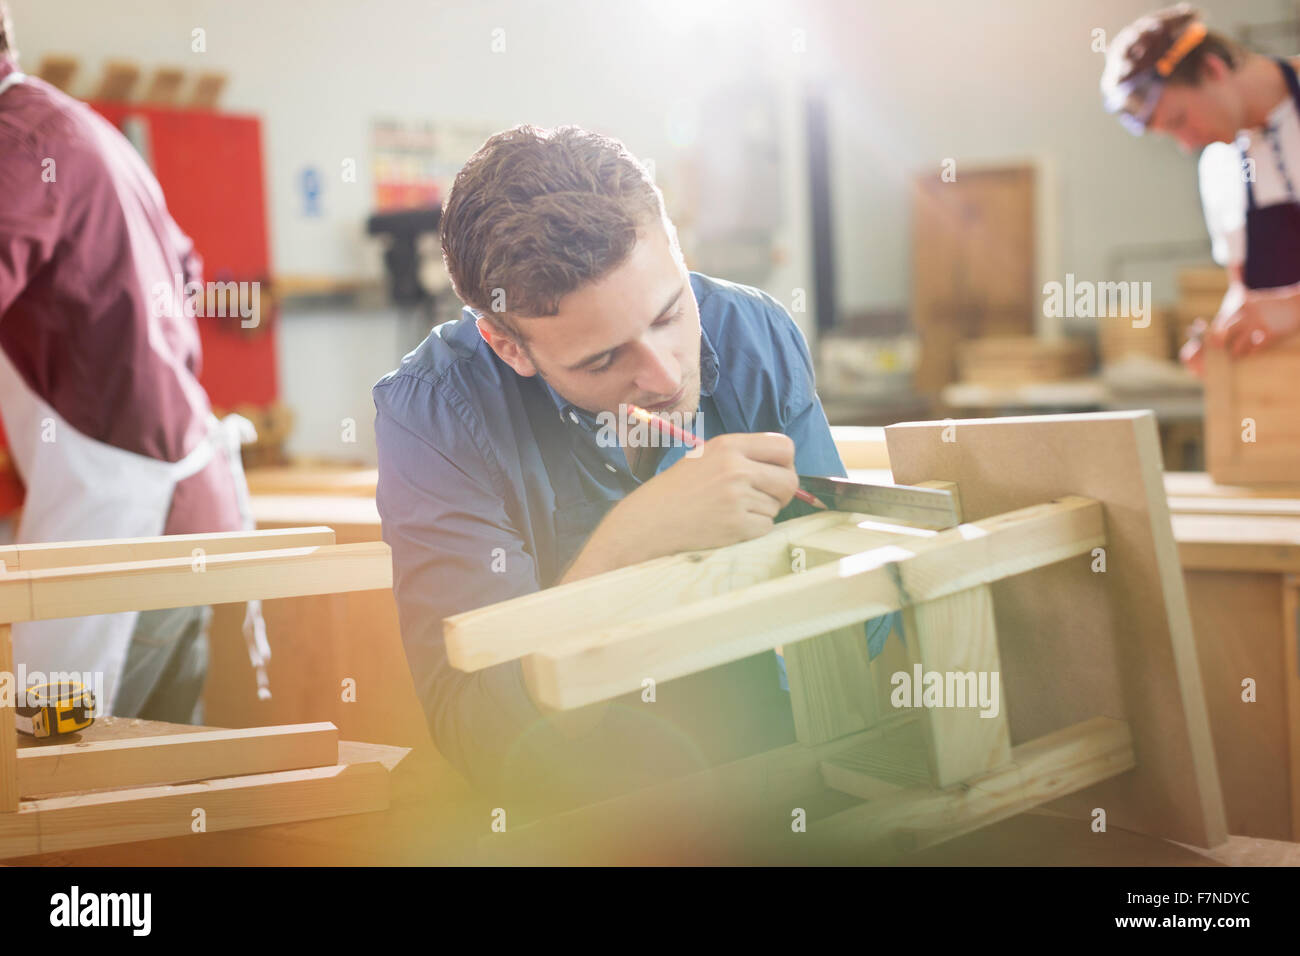 Carpenter measuring and marking wood in workshop Stock Photo - Alamy